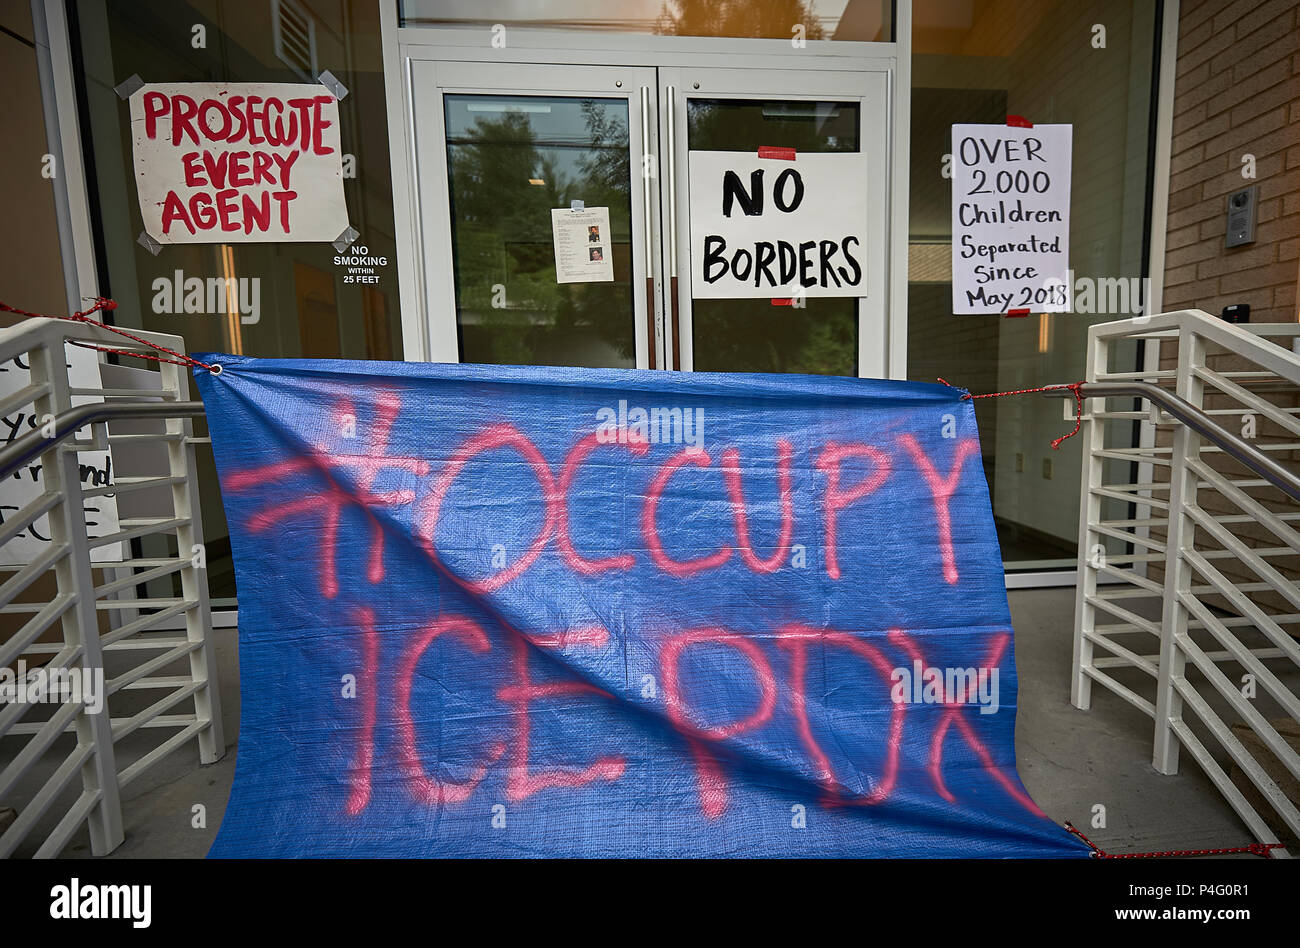 Portland, Oregon, USA. 21 June, 2018. An entrance to the field office of the United States Immigration and Customs Enforcement (ICE) in Portland, Oregon. The office was blockaded by protestors for several days before stopping operations on June 20. Protestors are objecting to the separation of families detained while seeking asylum on the U.S.-Mexico border.  Credit: Paul Jeffrey/Alamy Live News Stock Photo